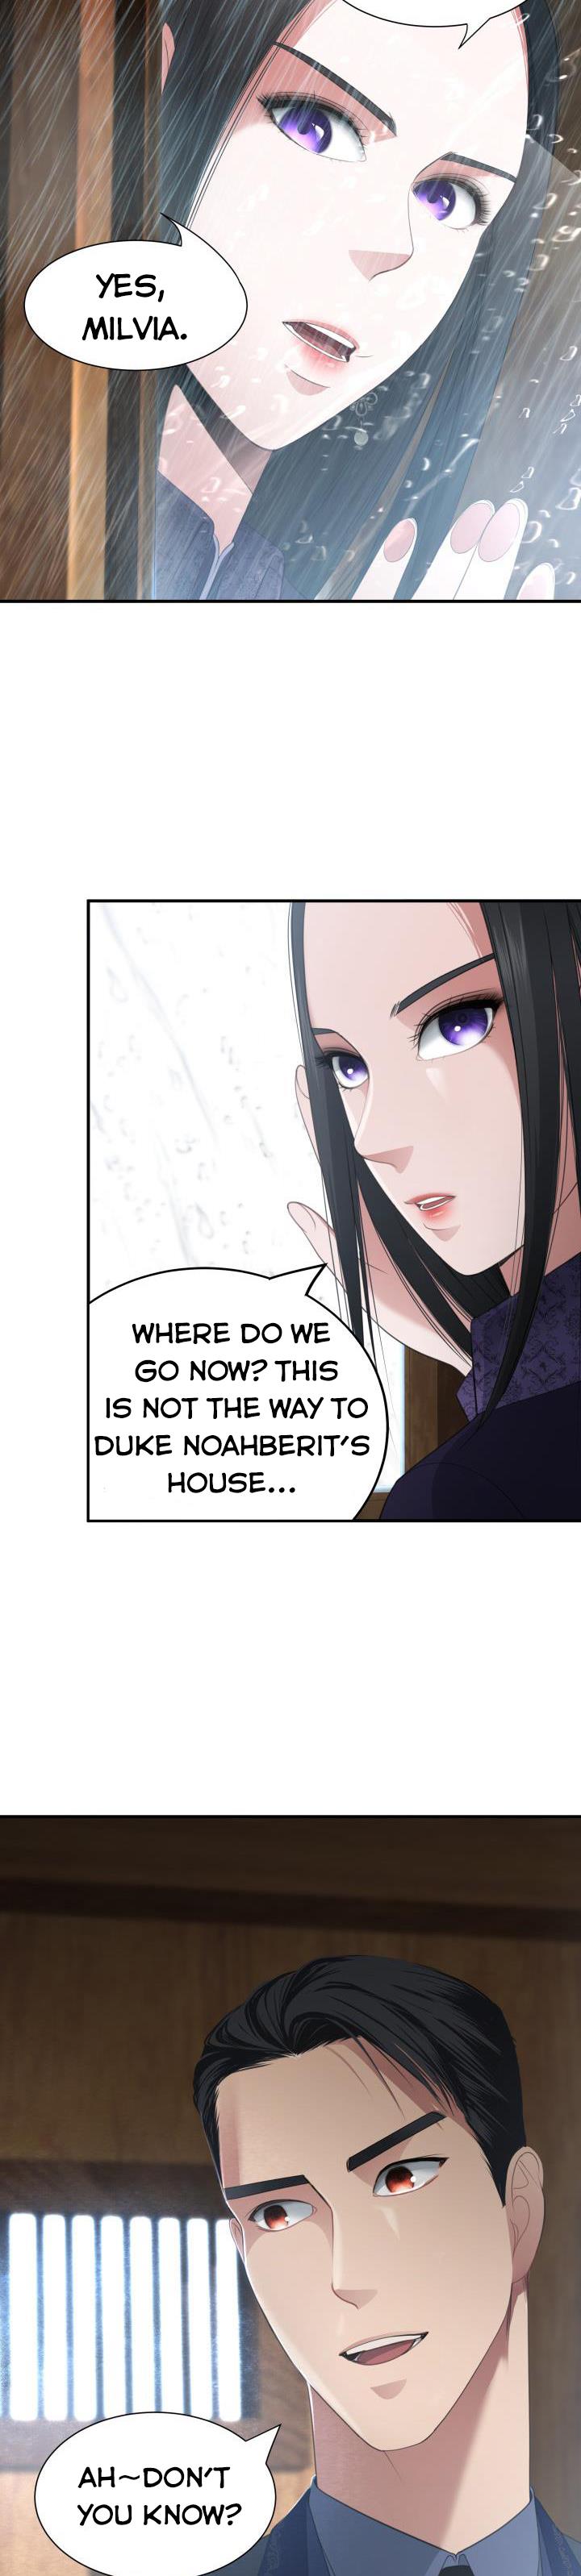 How can a time-limited evil gain her vengeance? chapter 25